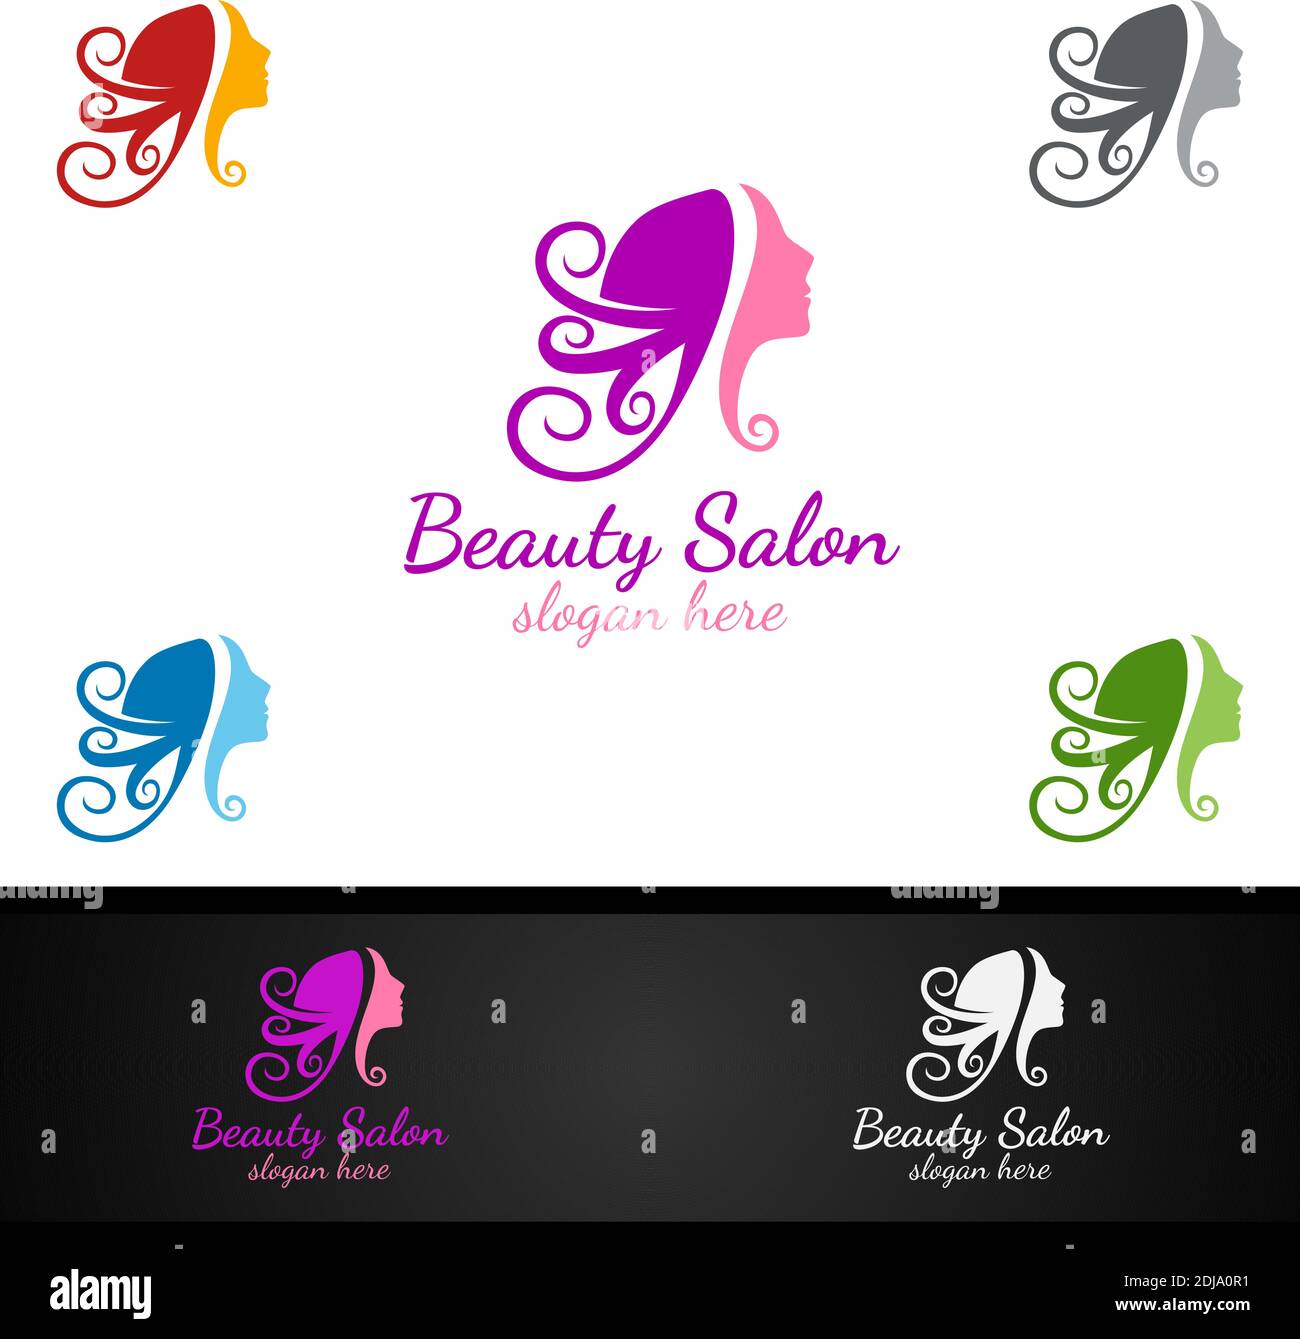 Salon Fashion Logo for Beauty Hairstylist, Cosmetics, or Boutique Design Stock Vector